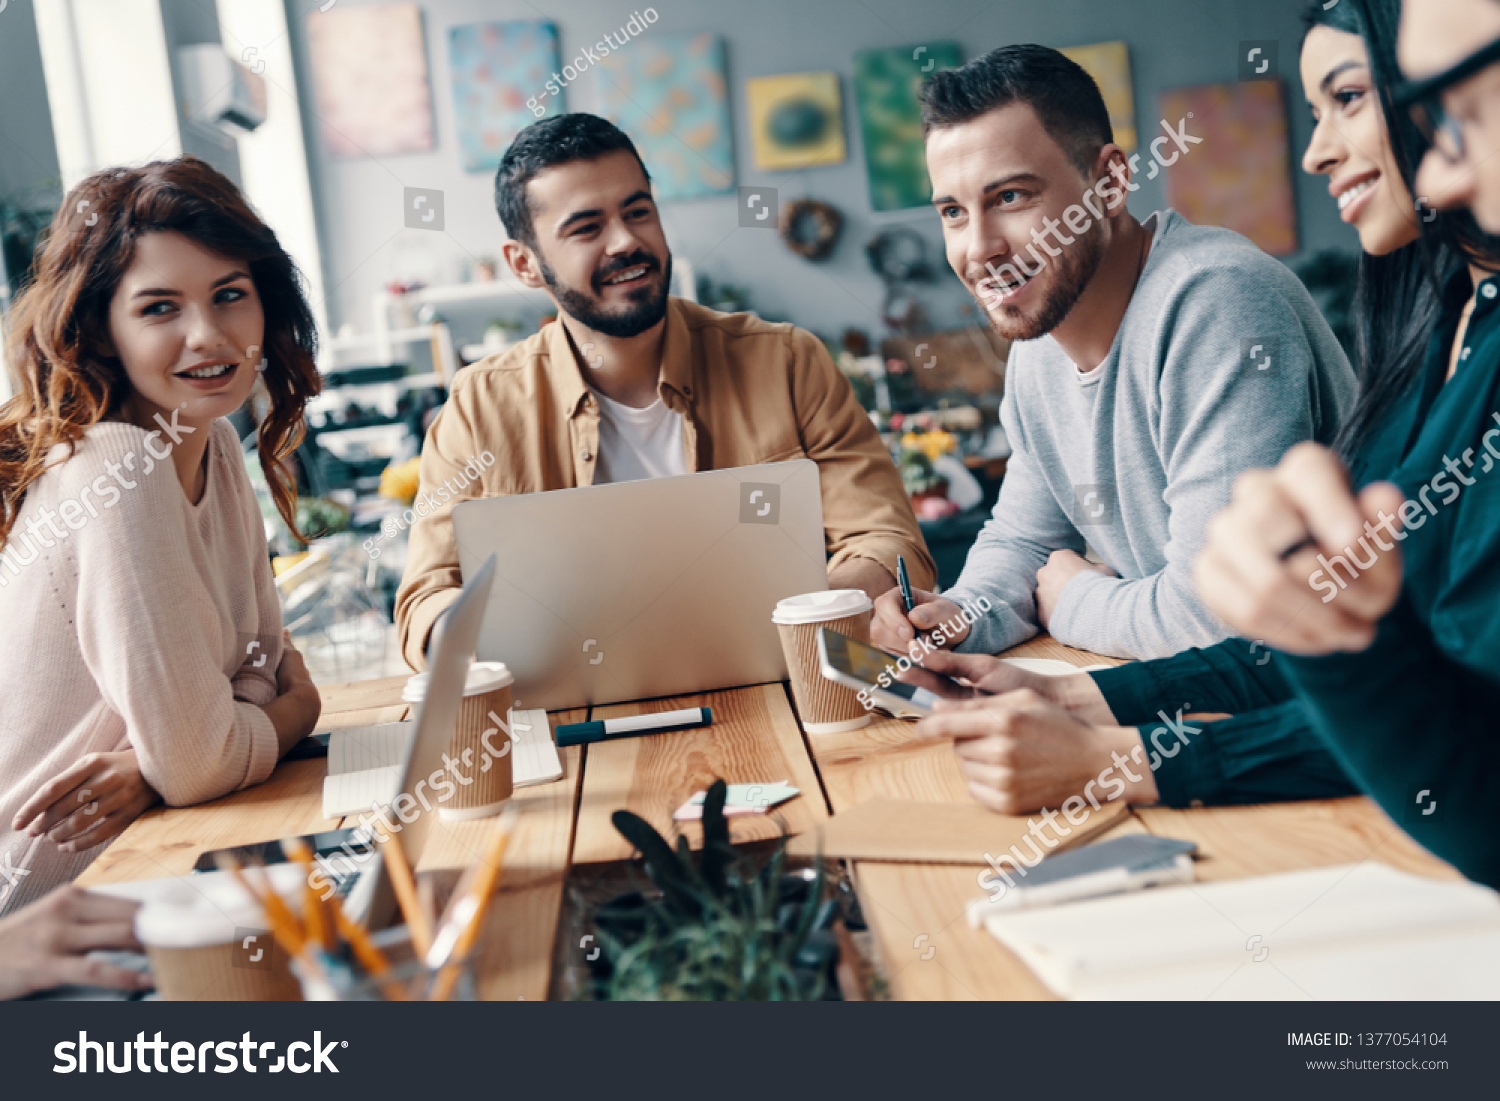 Collaboration. Group of young modern people in smart casual wear discussing something and smiling while working in the creative office   #1377054104